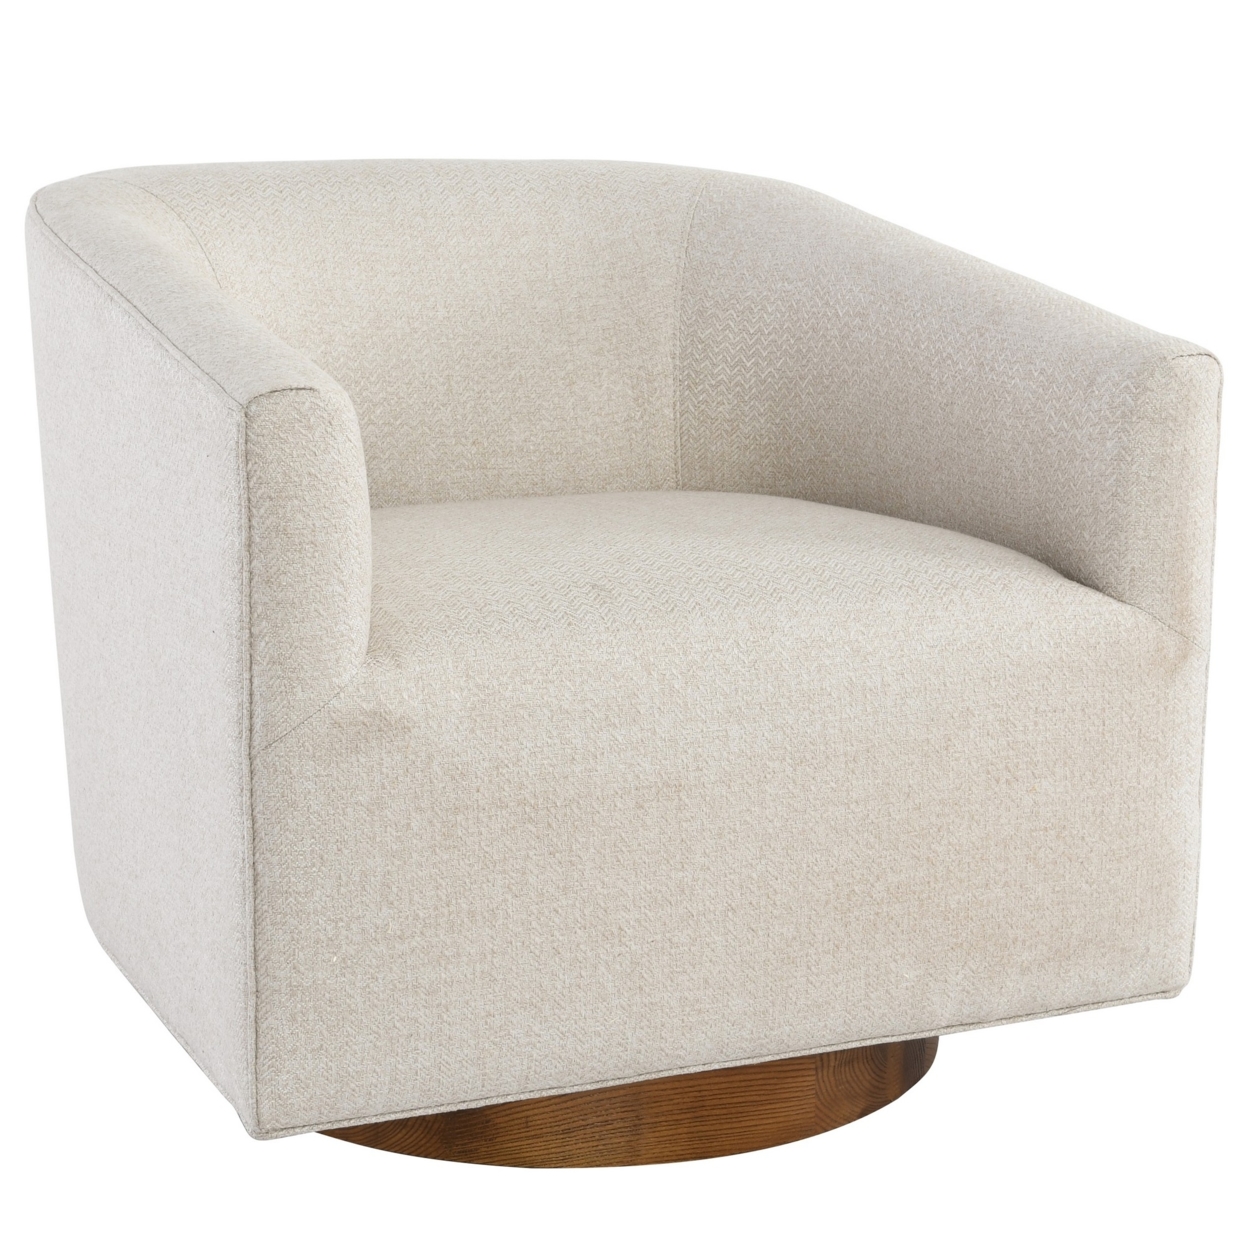 30 Inch Swivel Accent Chair, Soft Polyester, Curved Back, Beige, Brown- Saltoro Sherpi